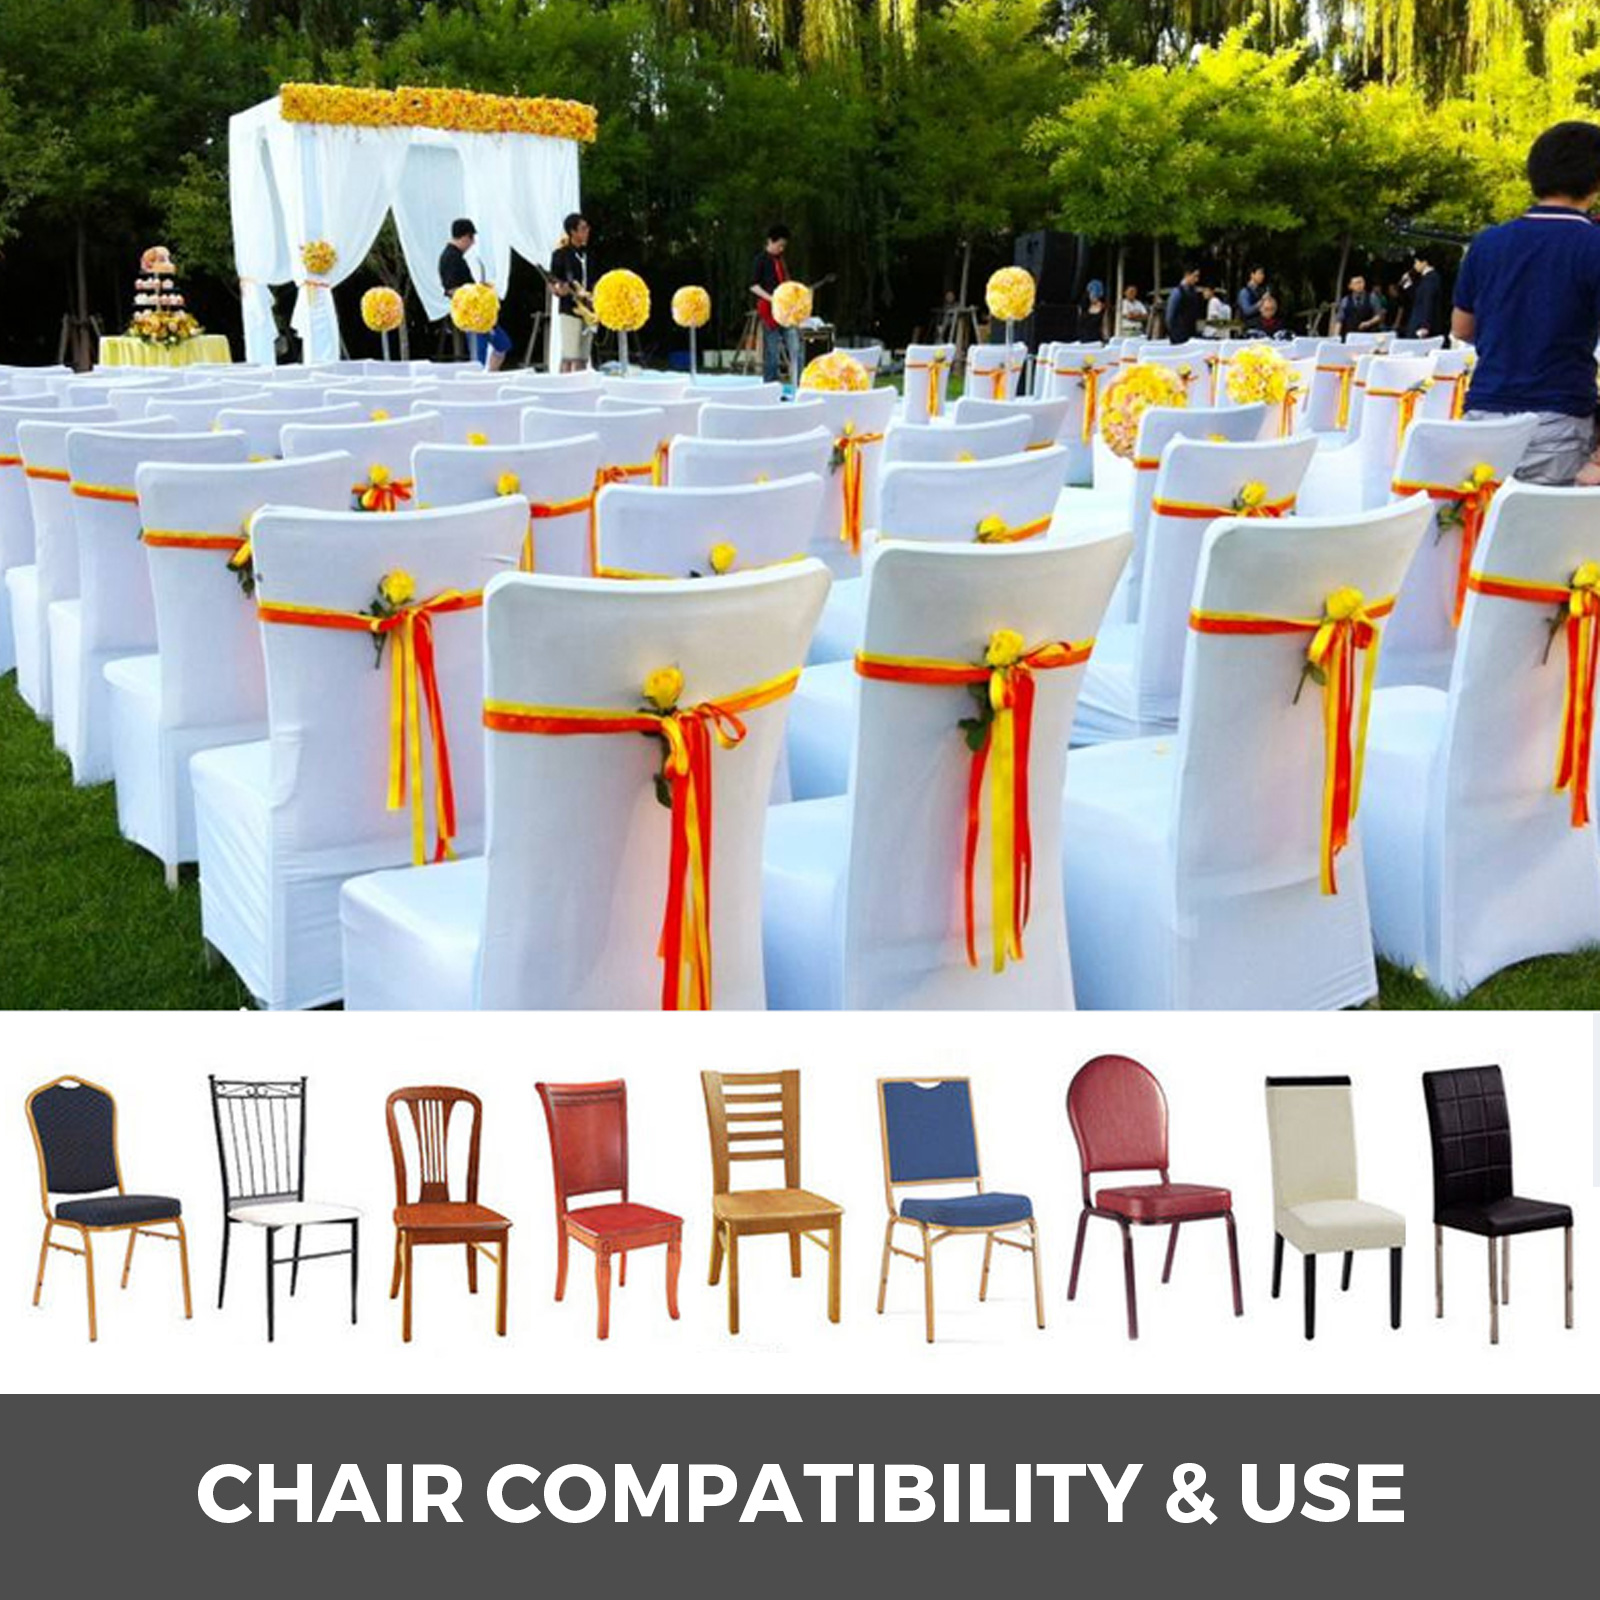 VEVORbrand 100 PCS White Chair Covers Spandex Chair Covers for